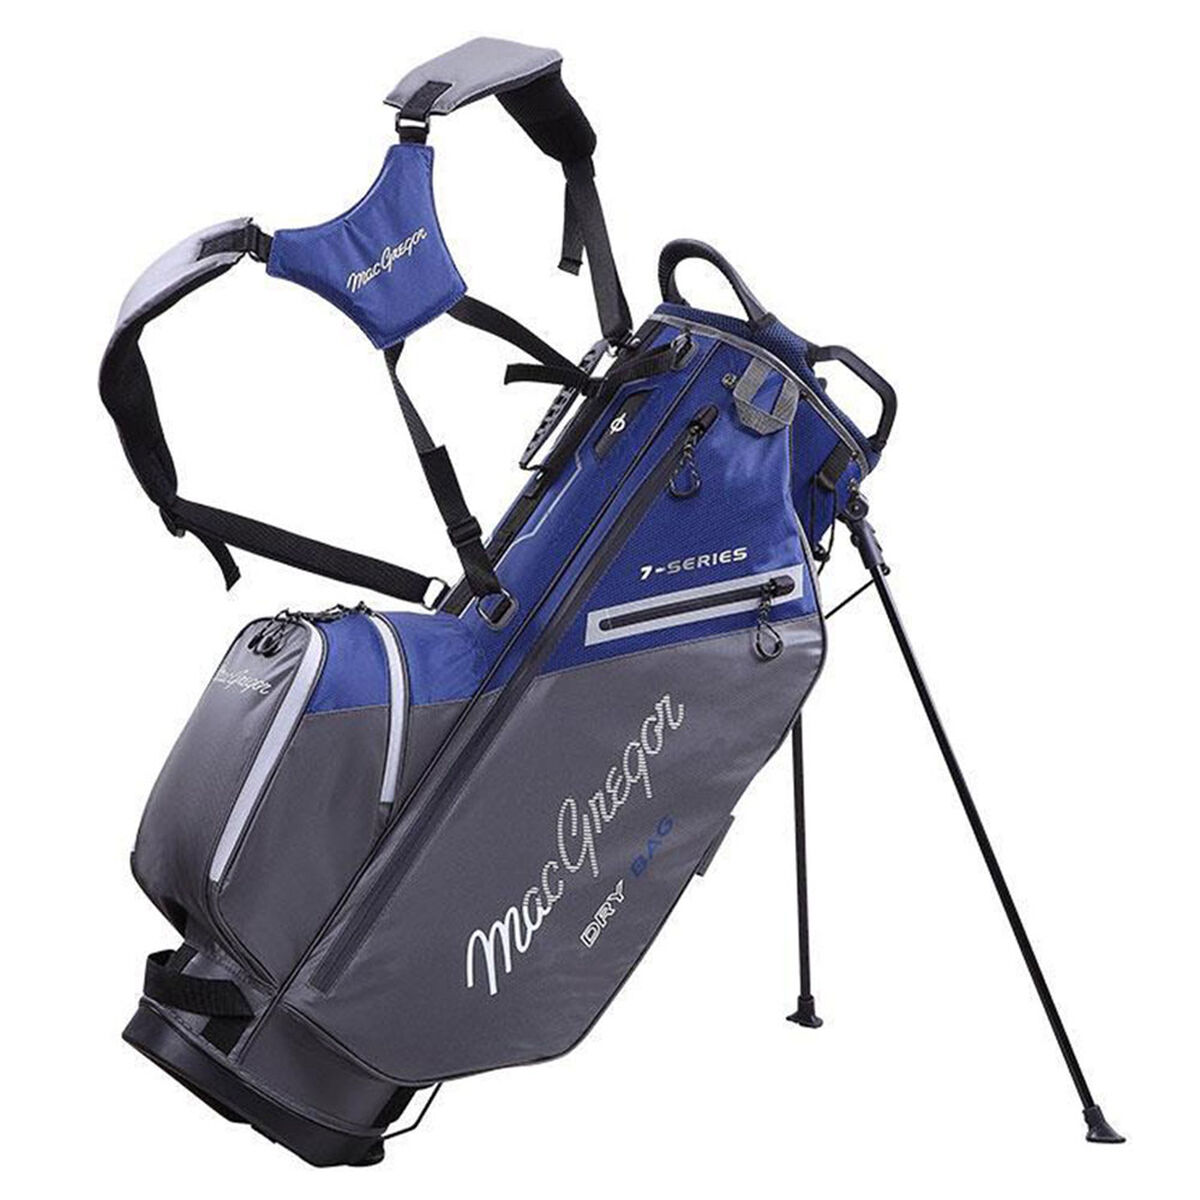 MacGregor Navy Blue and Grey 7-Series Water-Resistant Golf Stand Bag, Size: One Size  | American Golf